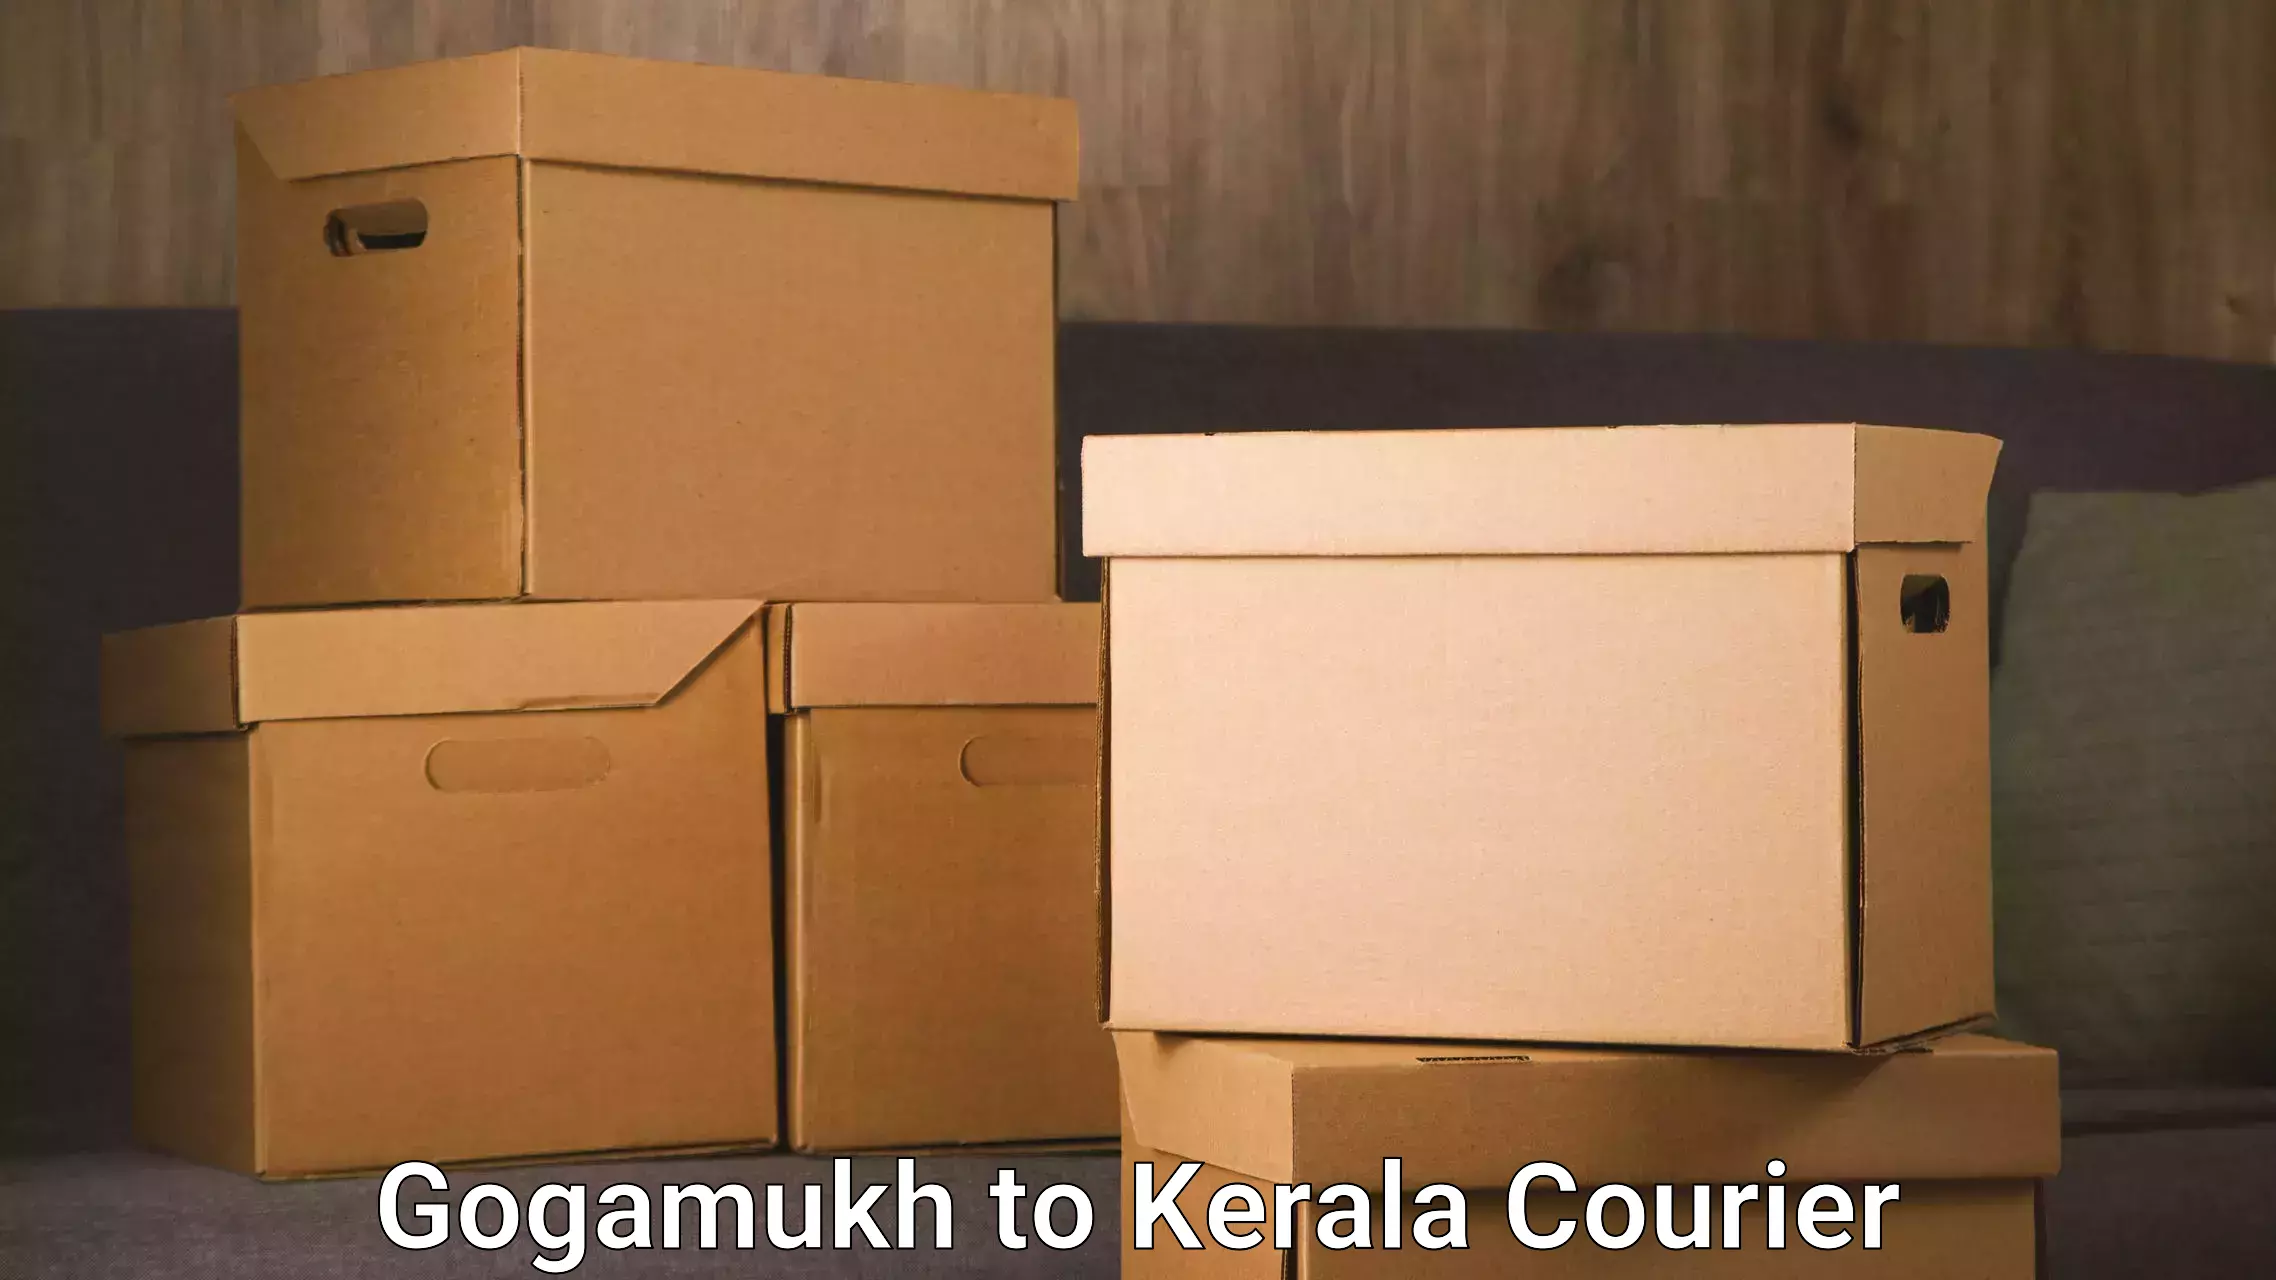 Flexible delivery scheduling Gogamukh to Kozhikode